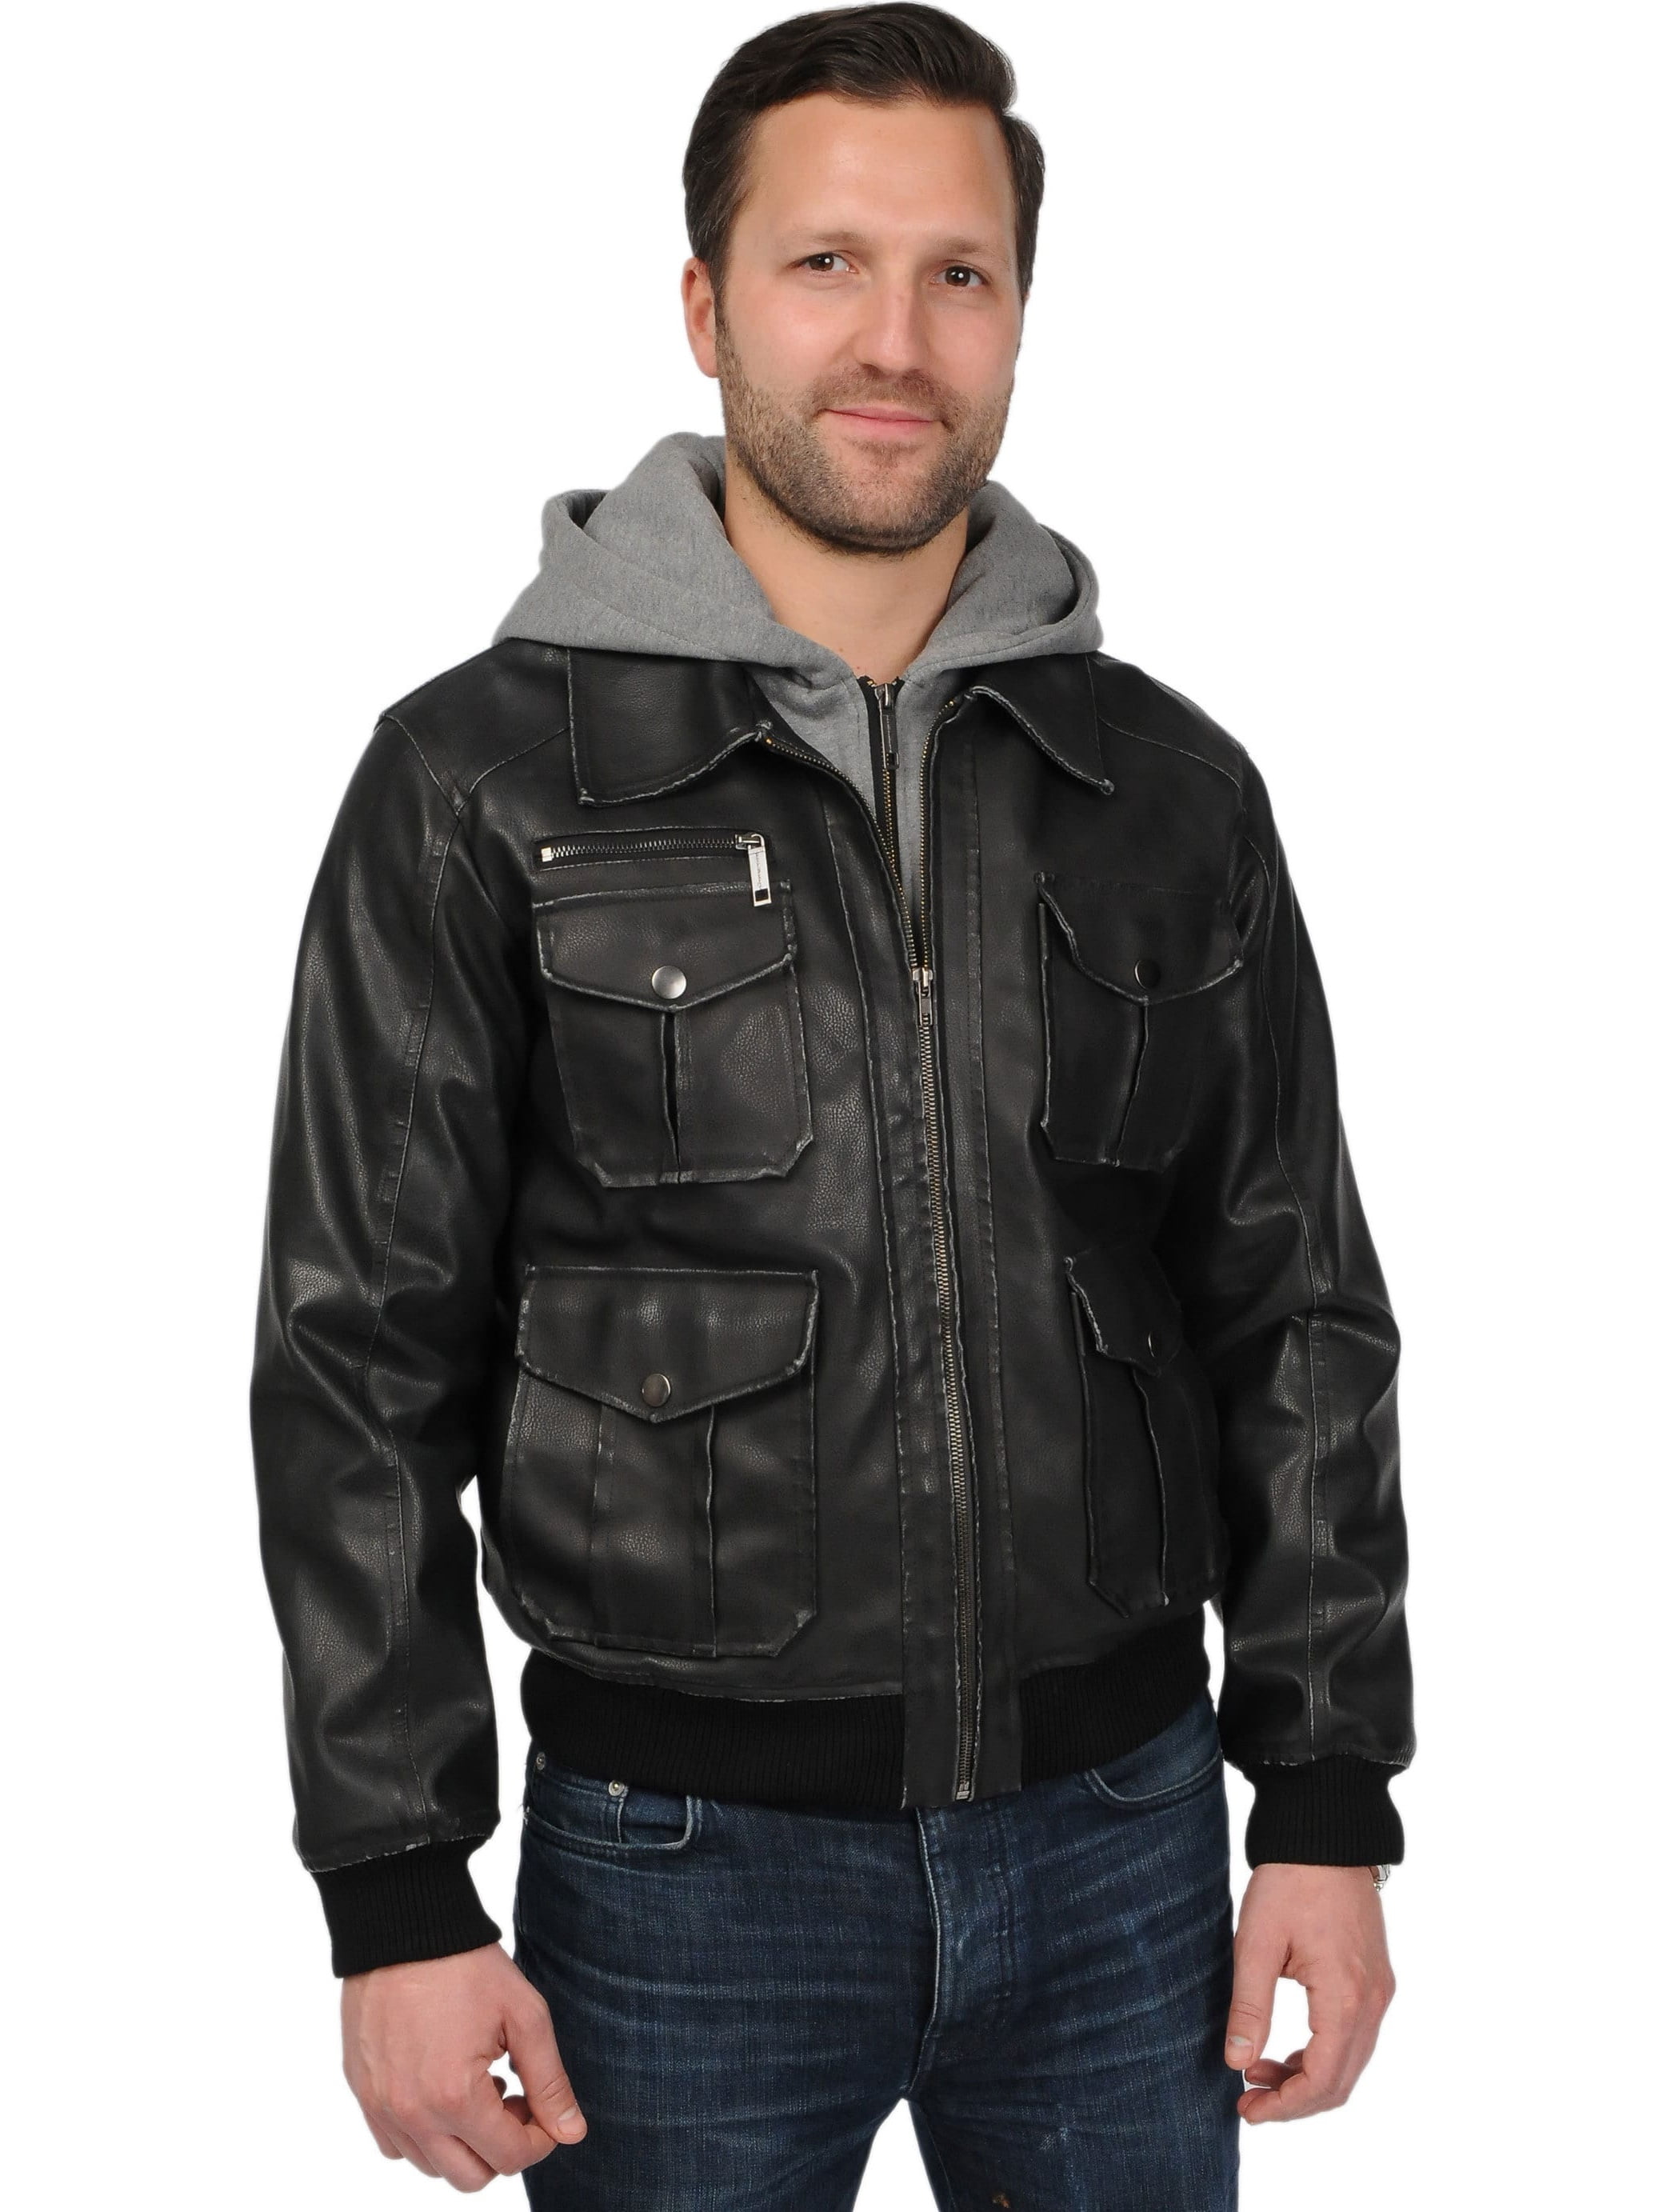 X-Small - 4Xl Brown Leather Bomber Jacket with Removable Hood Genuine Brown leather jacket with Detachable hood